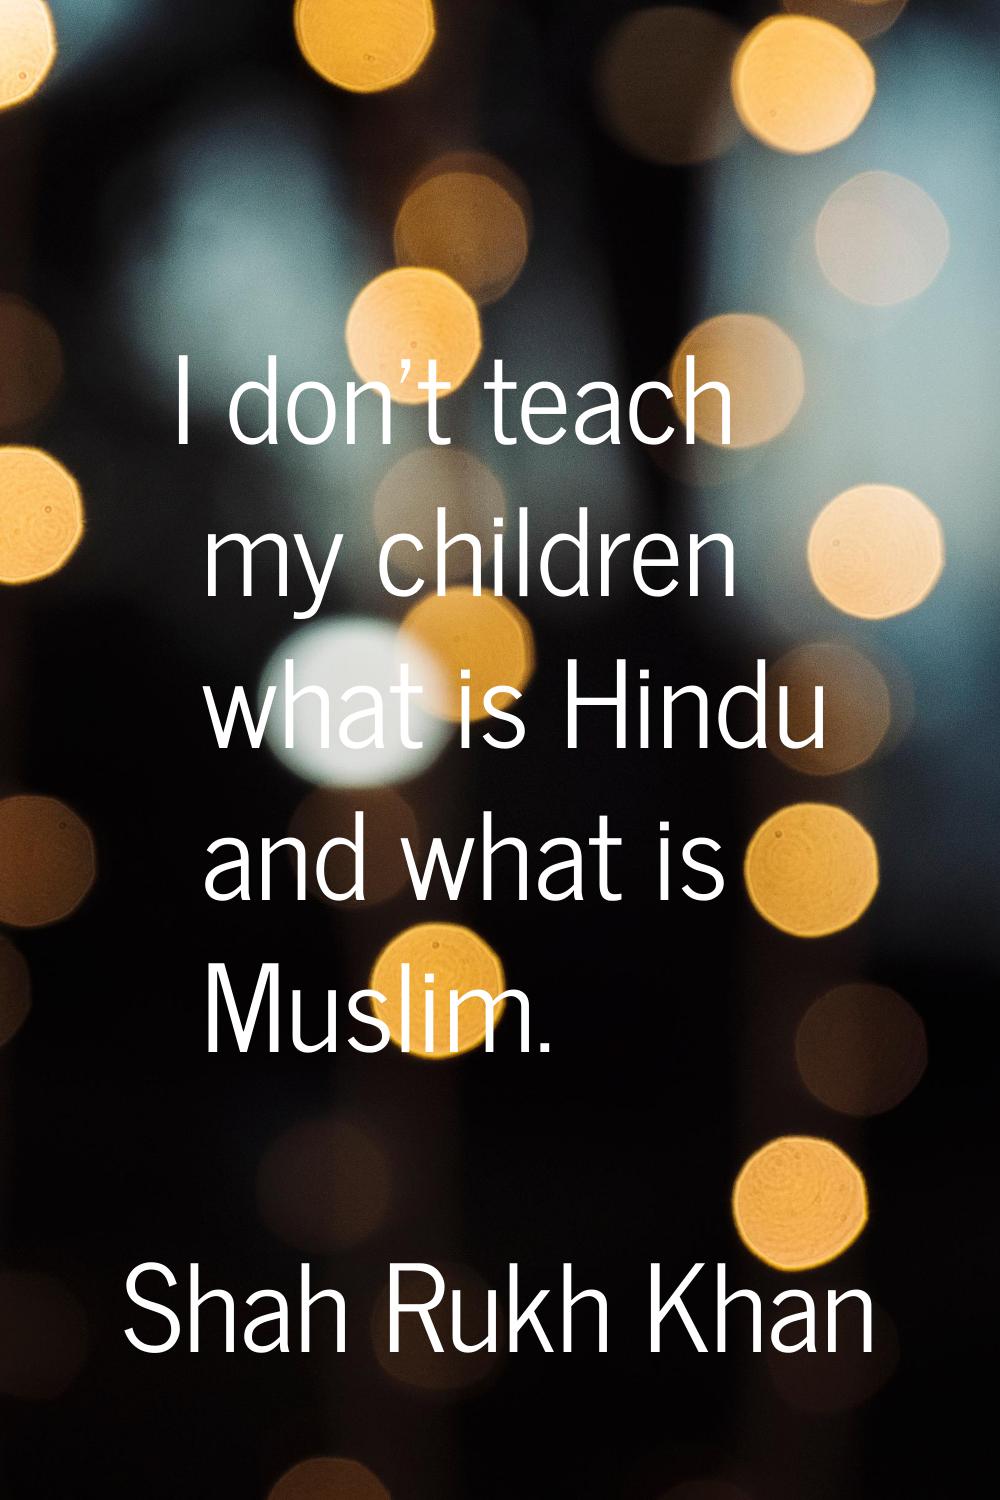 I don't teach my children what is Hindu and what is Muslim.